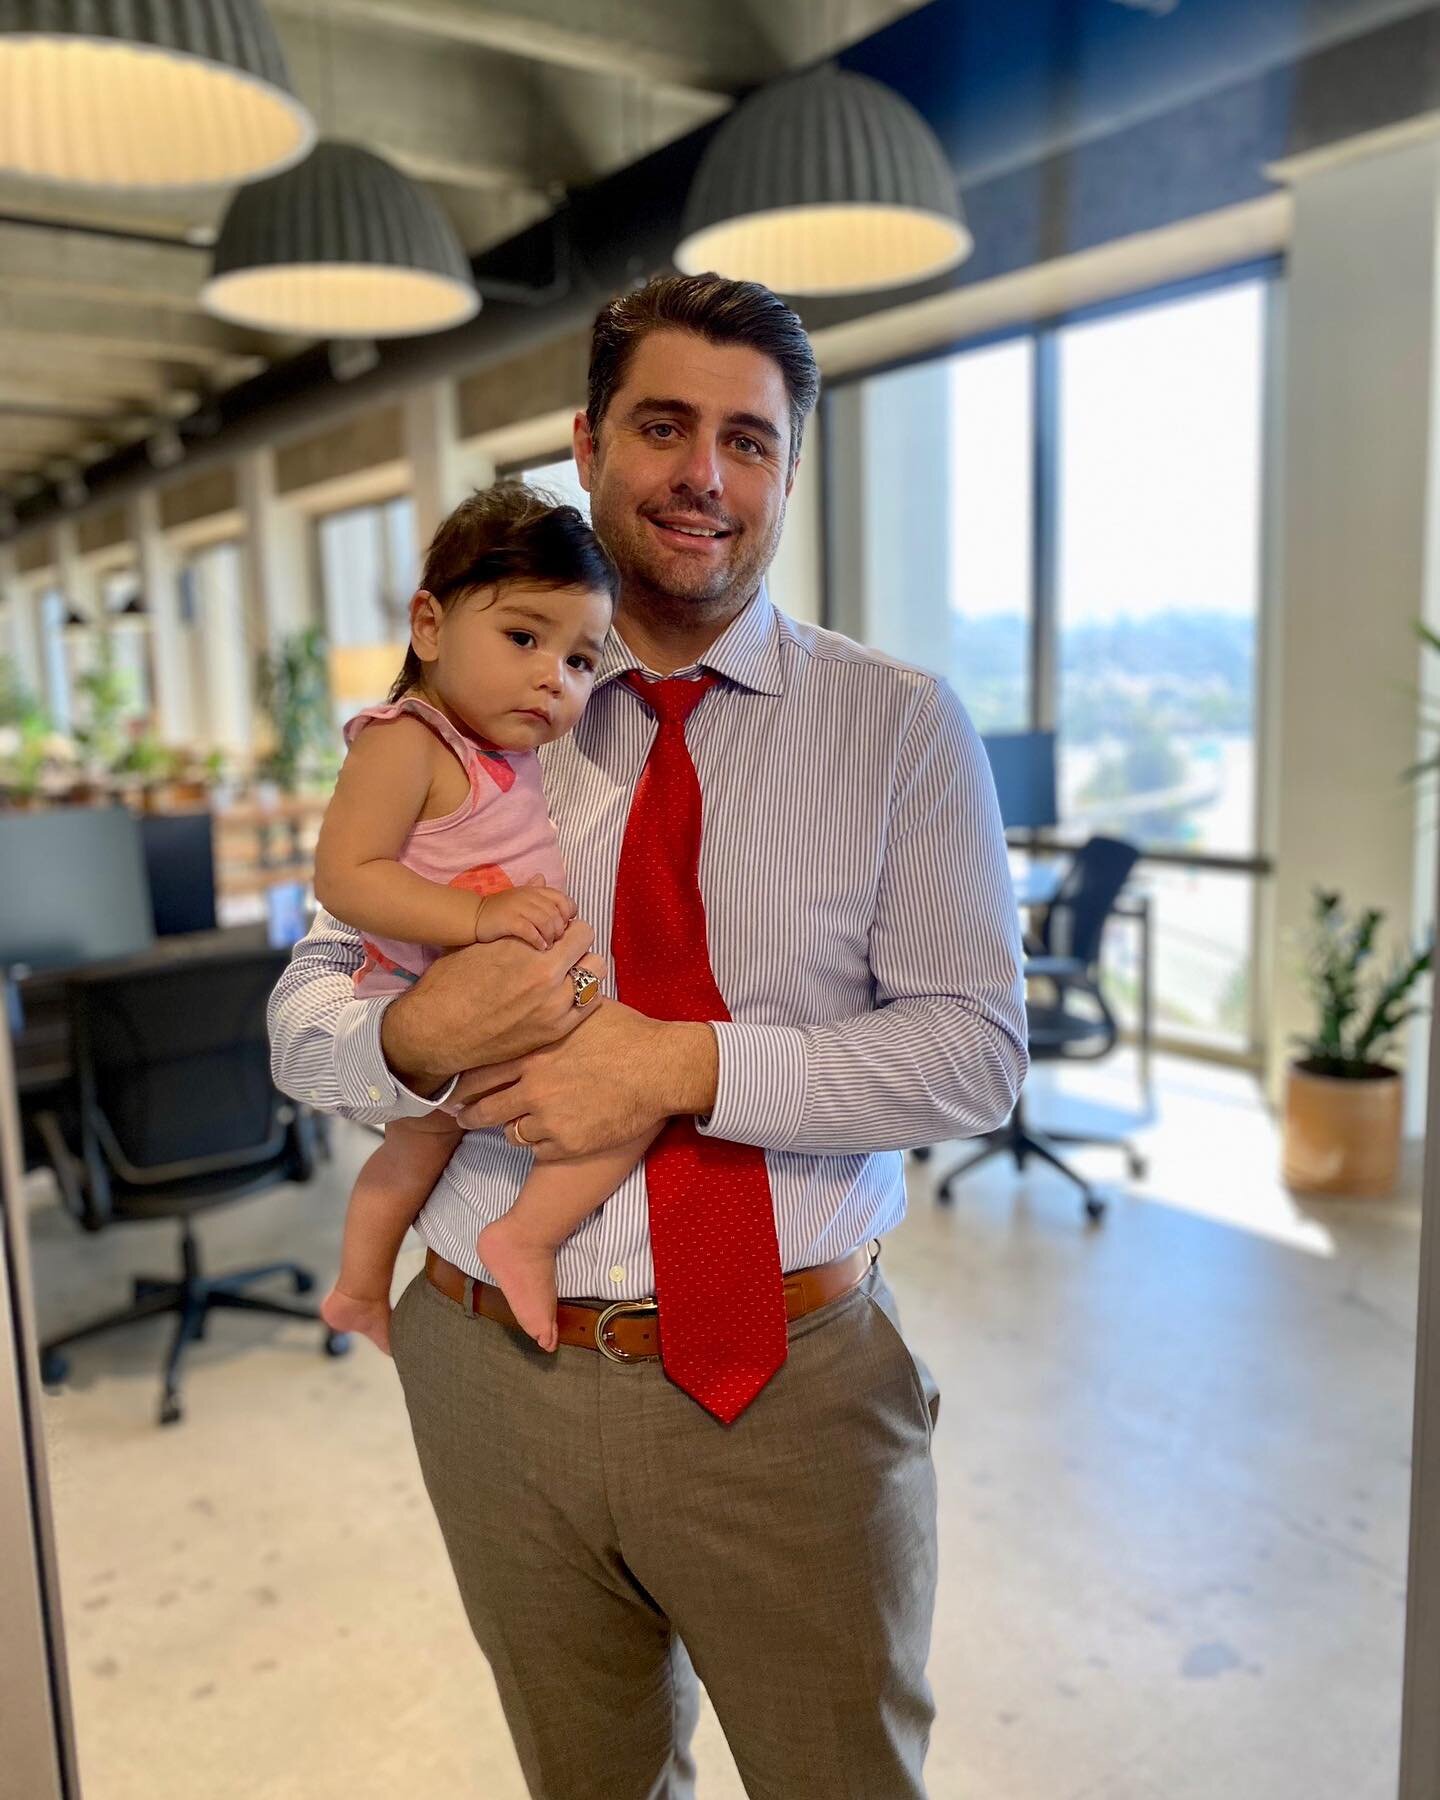 Hawkins Law &amp; Justice HQ: now offering baby holding service!! You hold my baby while I negotiate with insurance adjusters and defense attorneys simultaneously chugging cold brews until my Apple Watch says I washed my hands for 20 seconds.
#dontta